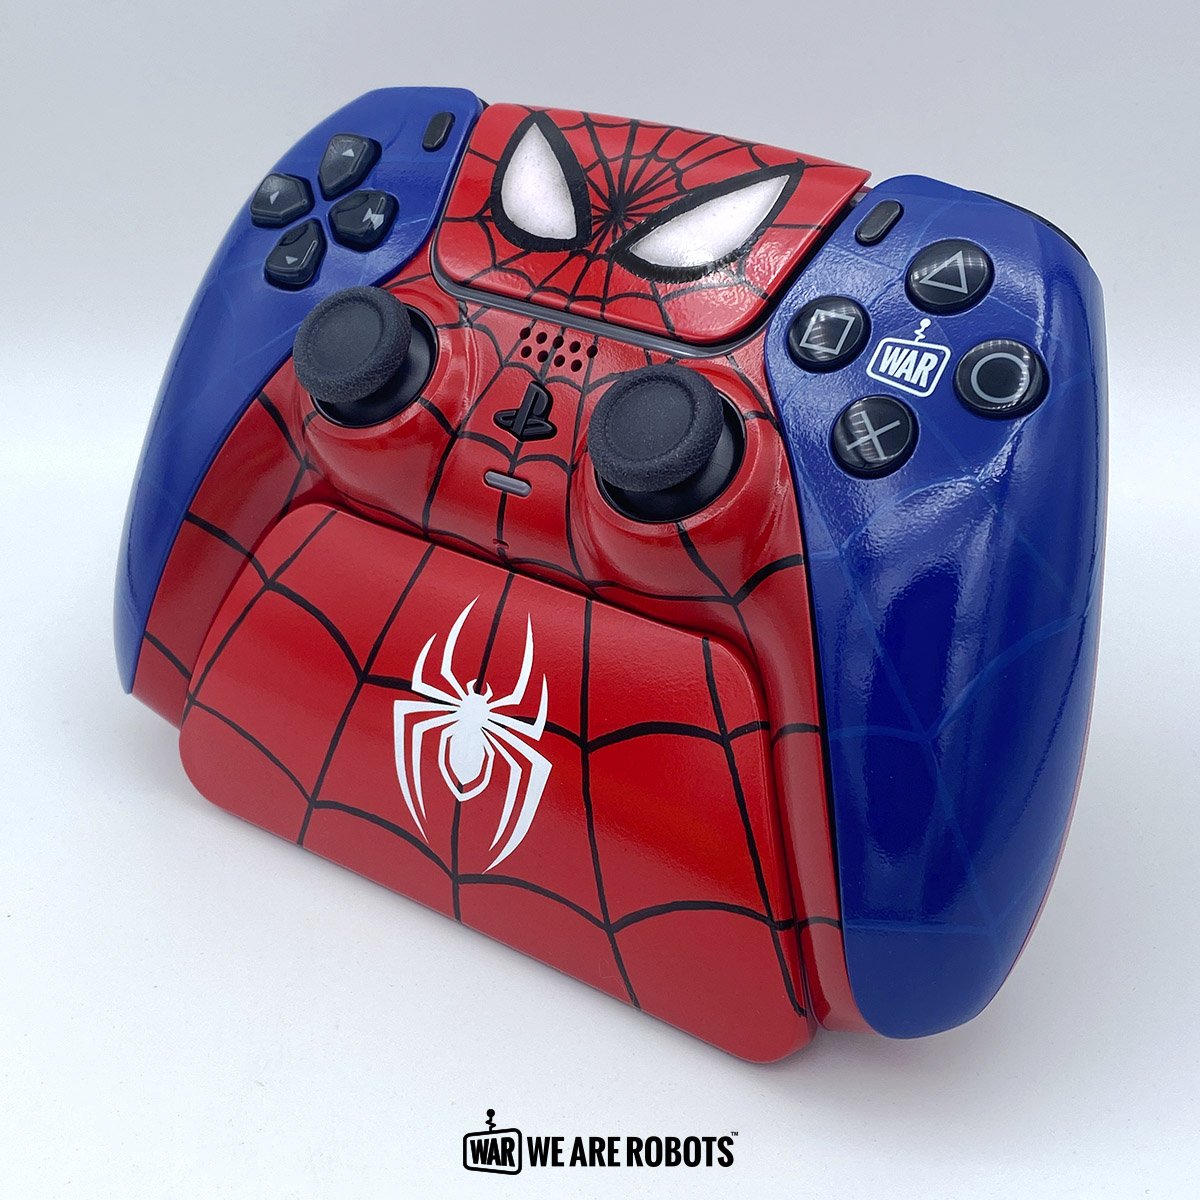 We Are Robots - Spiderman - Playstation 5 Controller